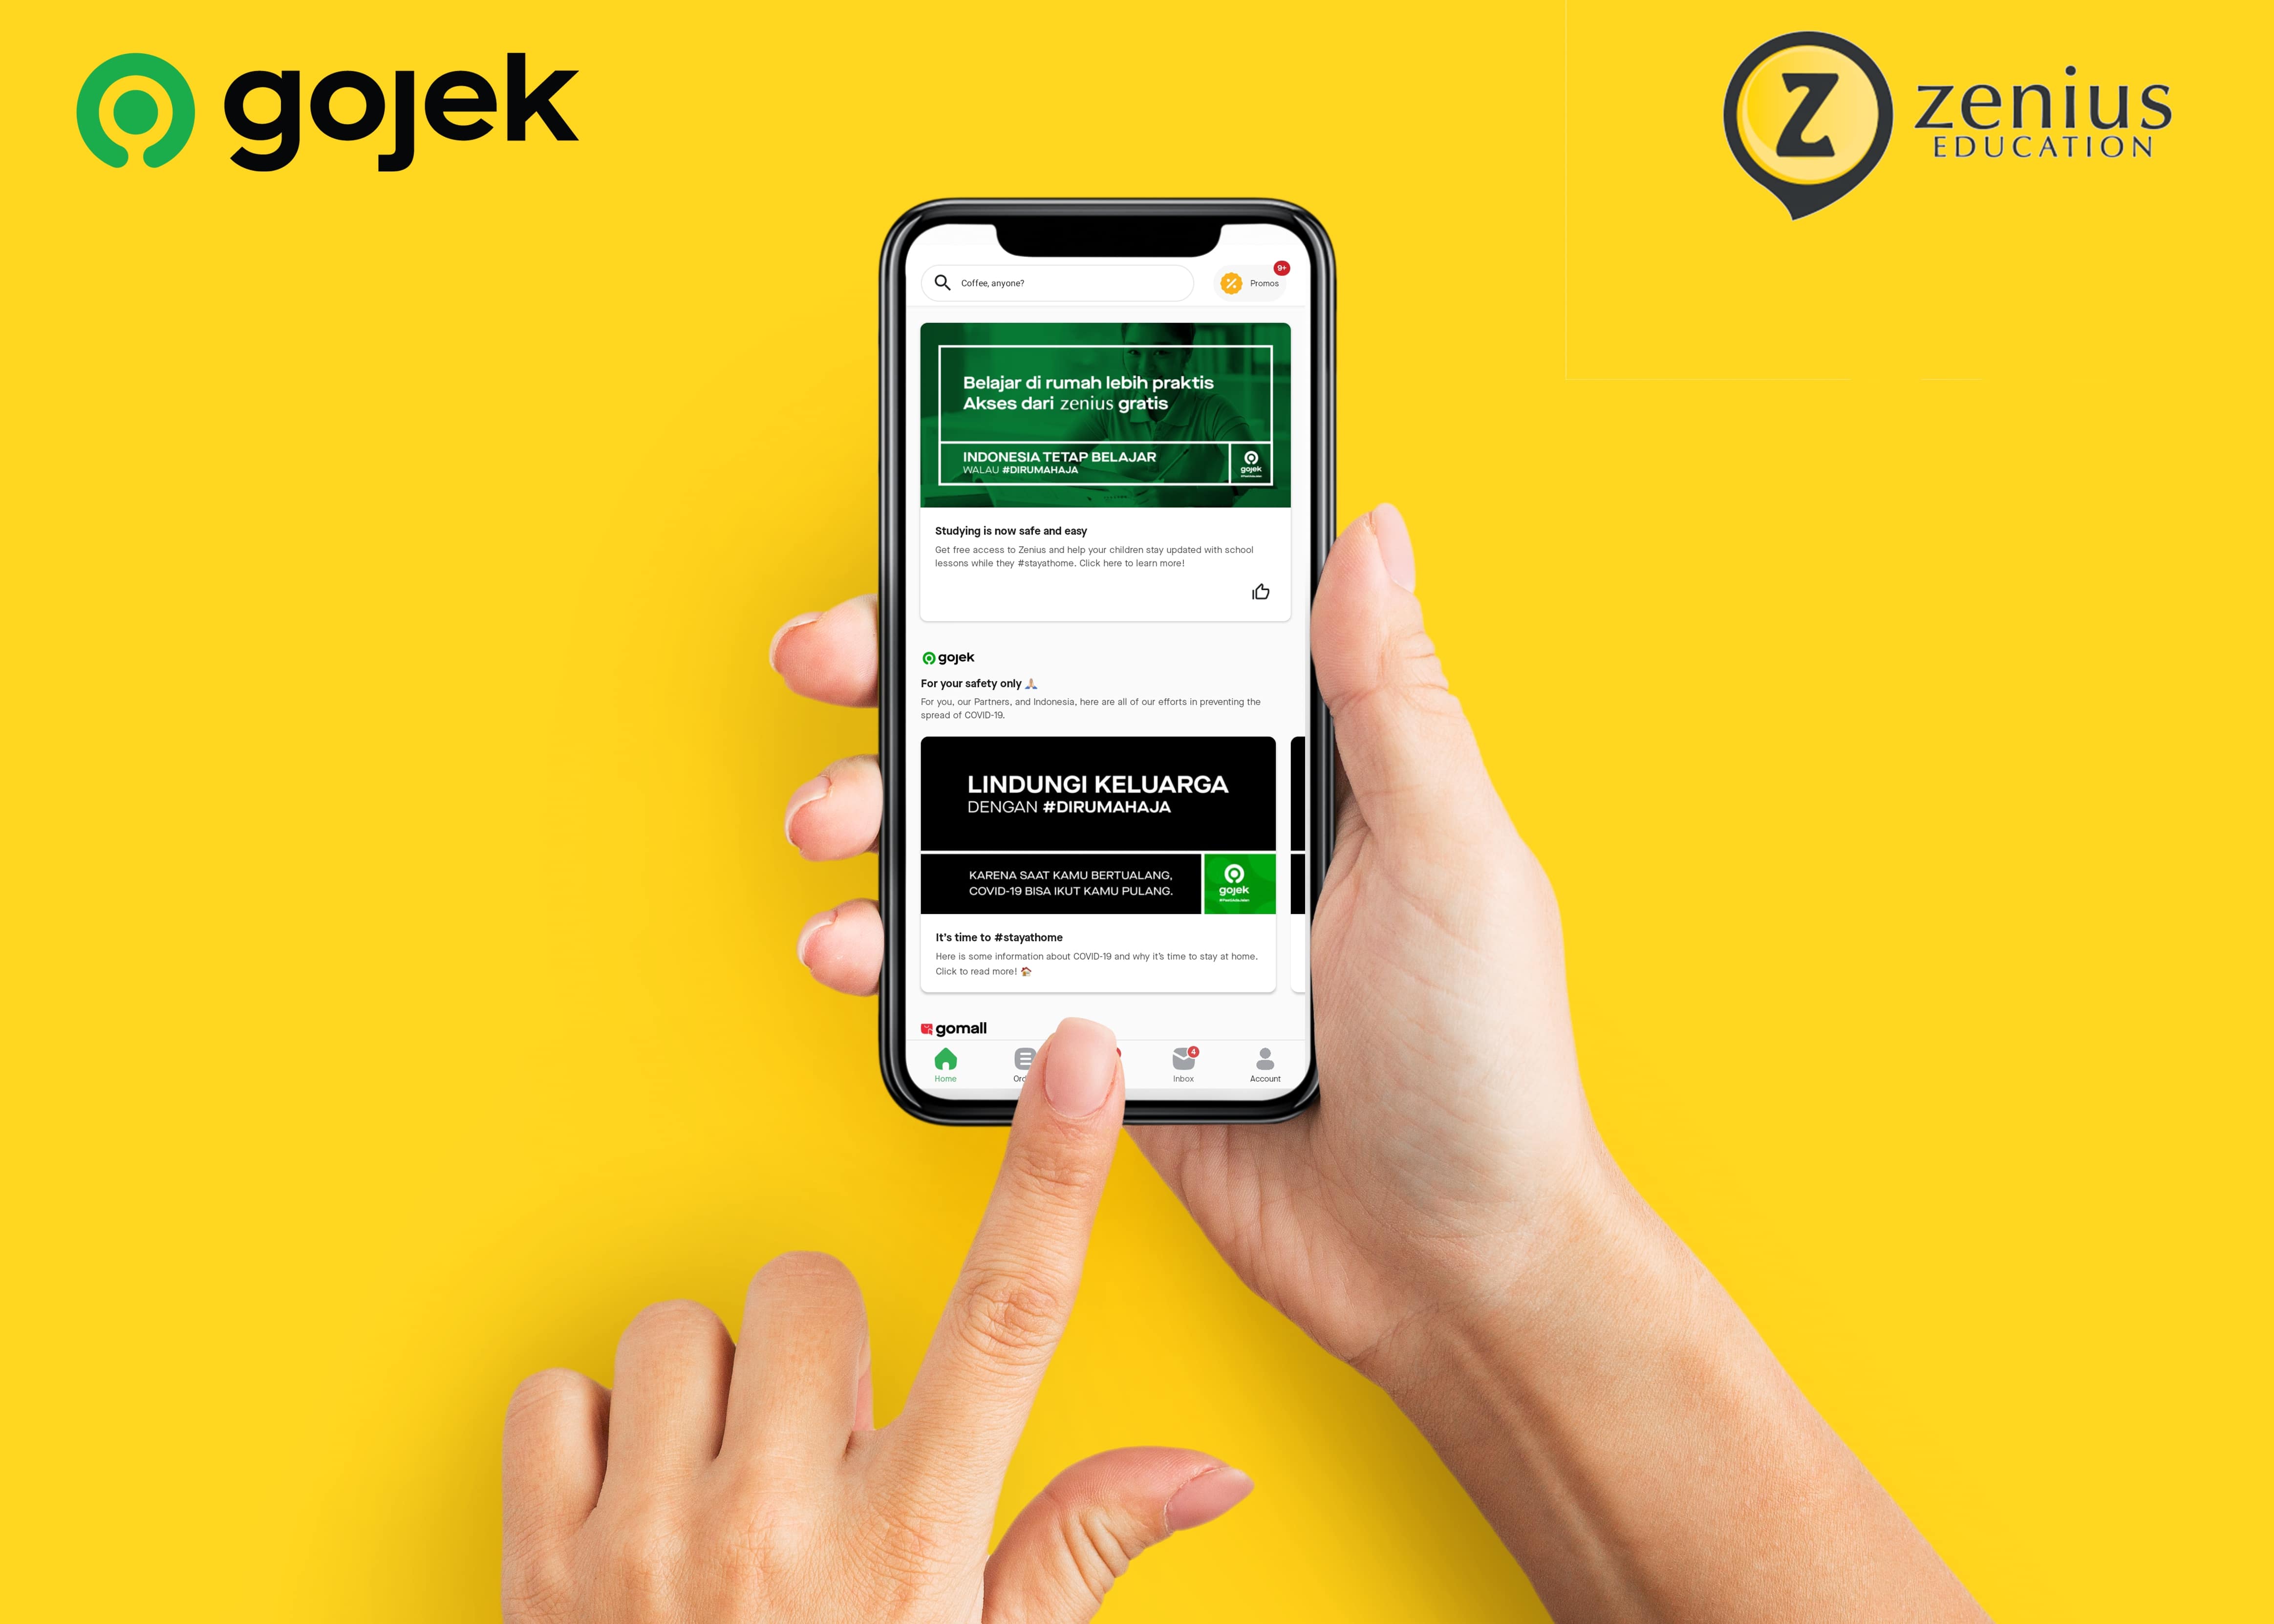 Zenius and Gojek partner to provide free learning materials for Indonesian students